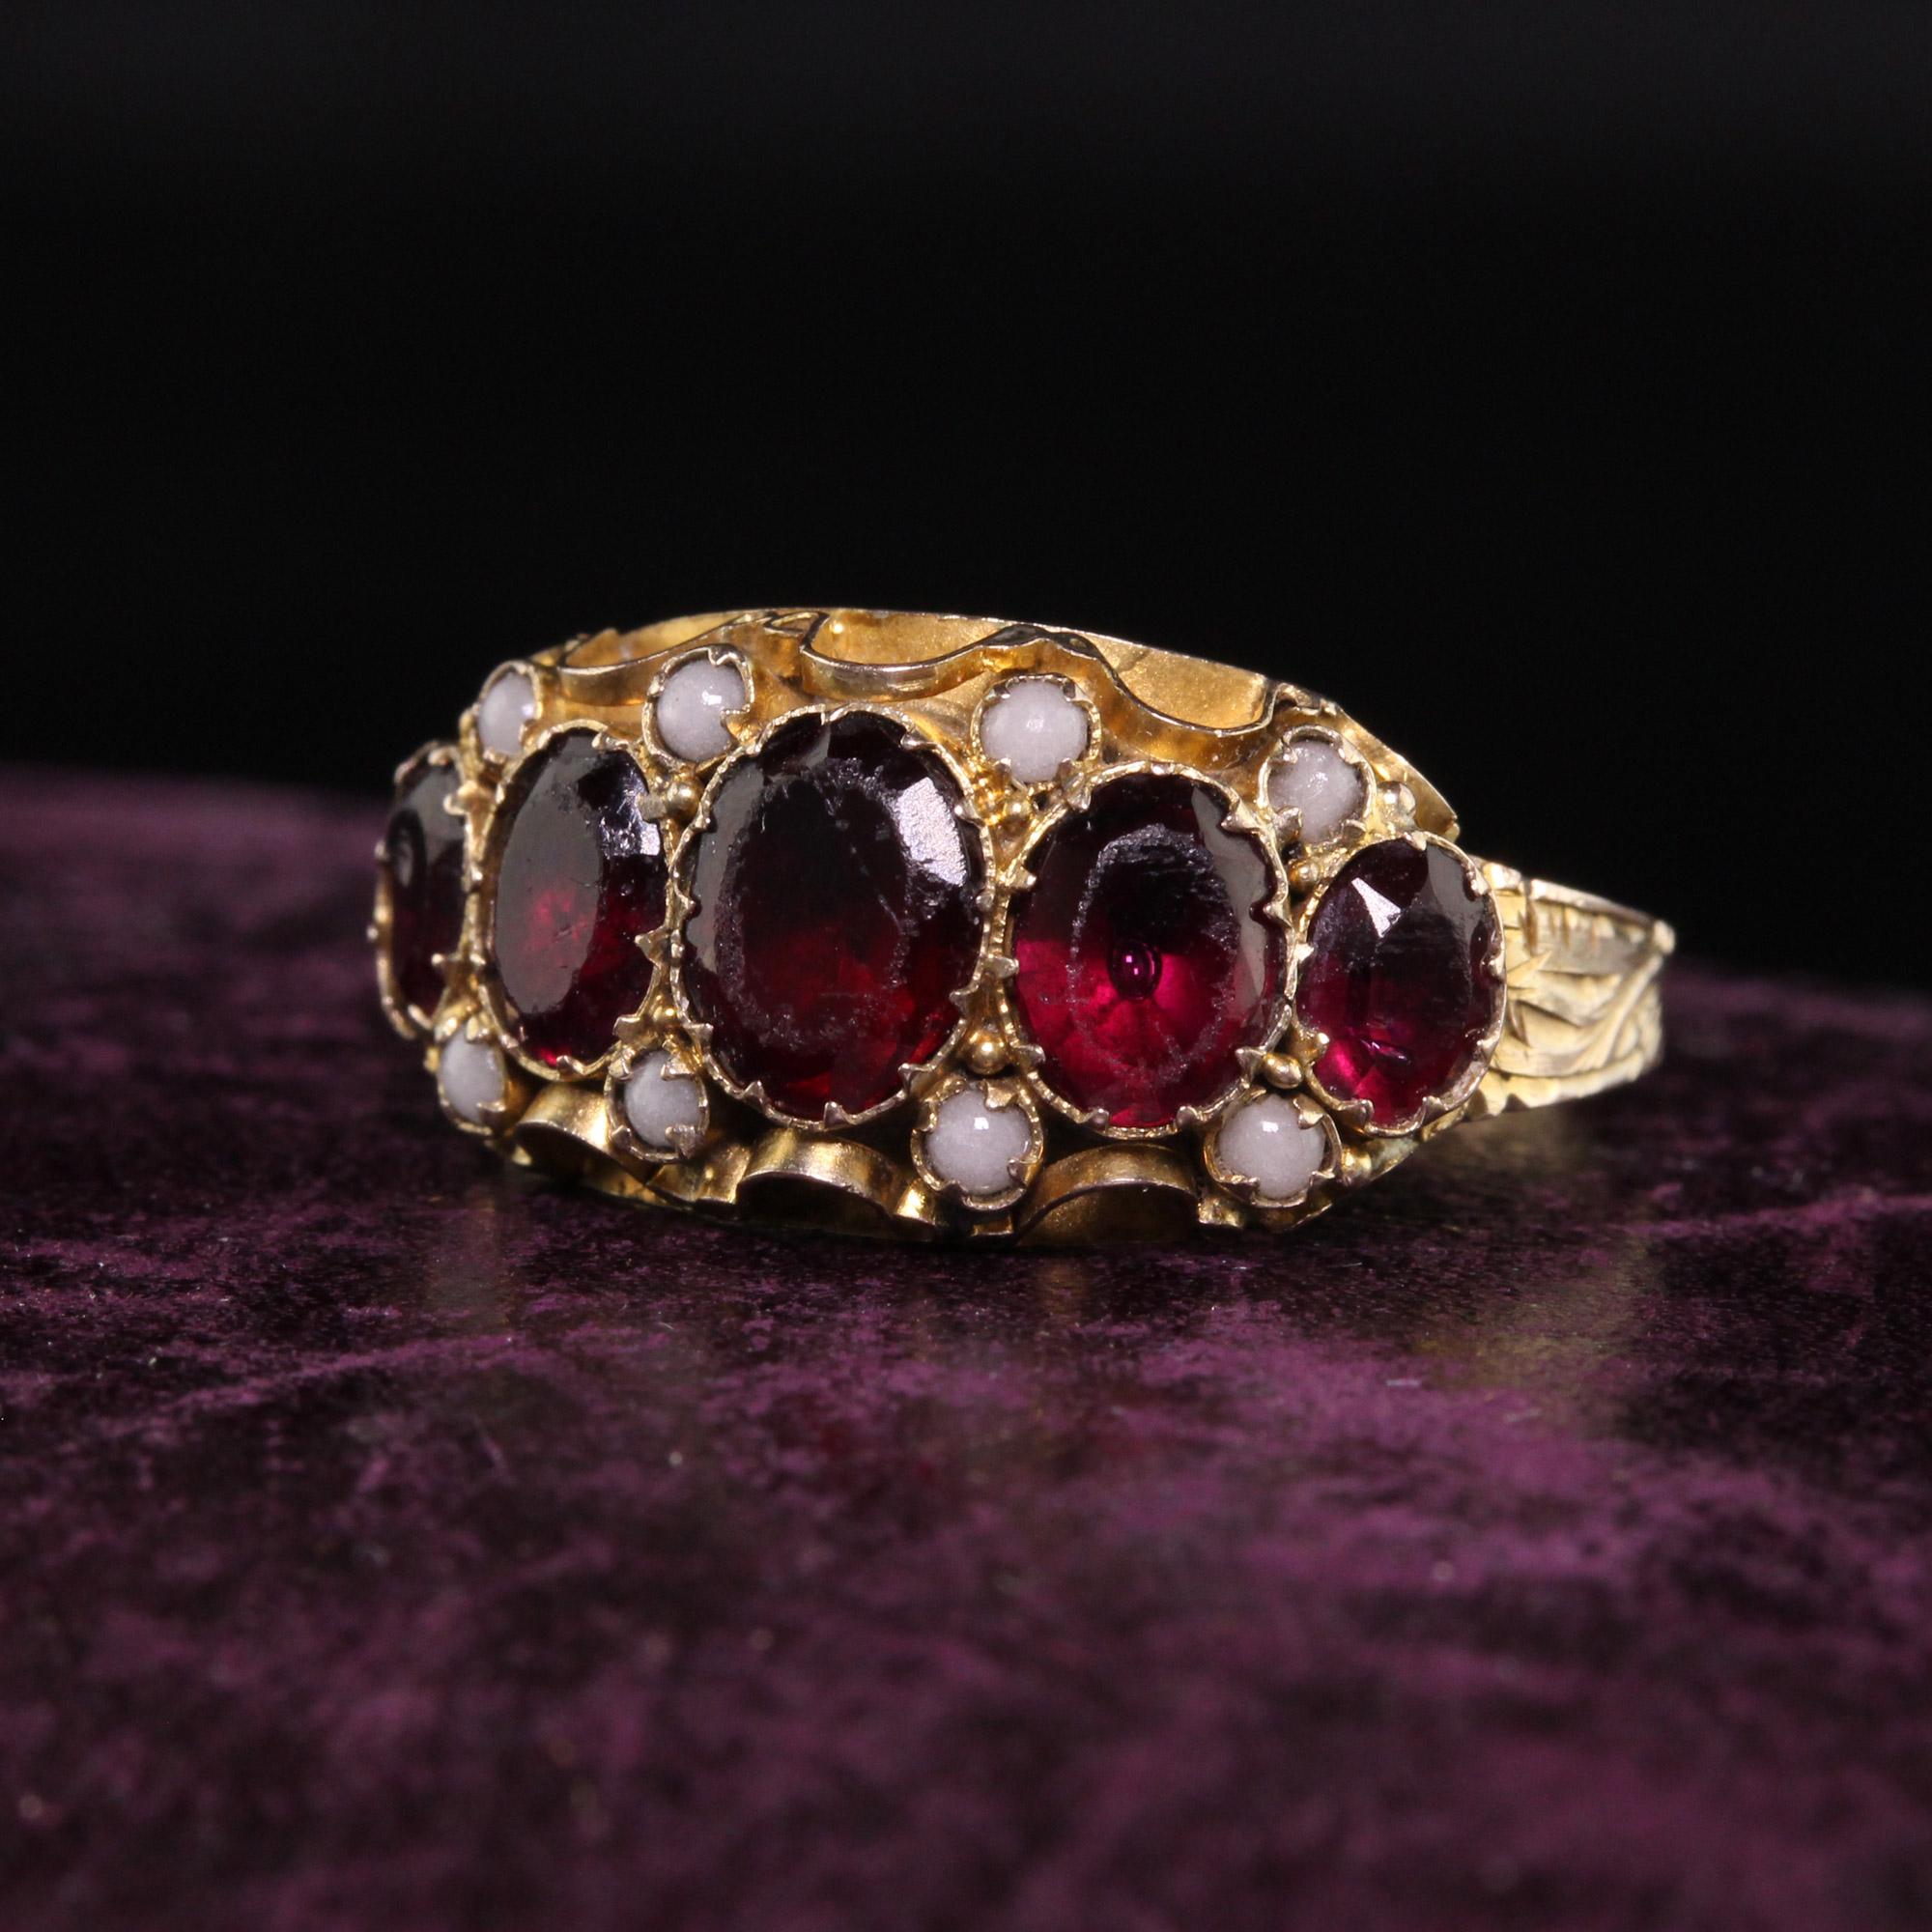 Beautiful Antique Victorian 9K Yellow Gold Garnet and Seed Pearl Five Stone Ring. This beautiful Victorian ring is crafted in 9k yellow gold. It has garnets and seed pearls set in a beautifully engraved Victorian mounting and is in good